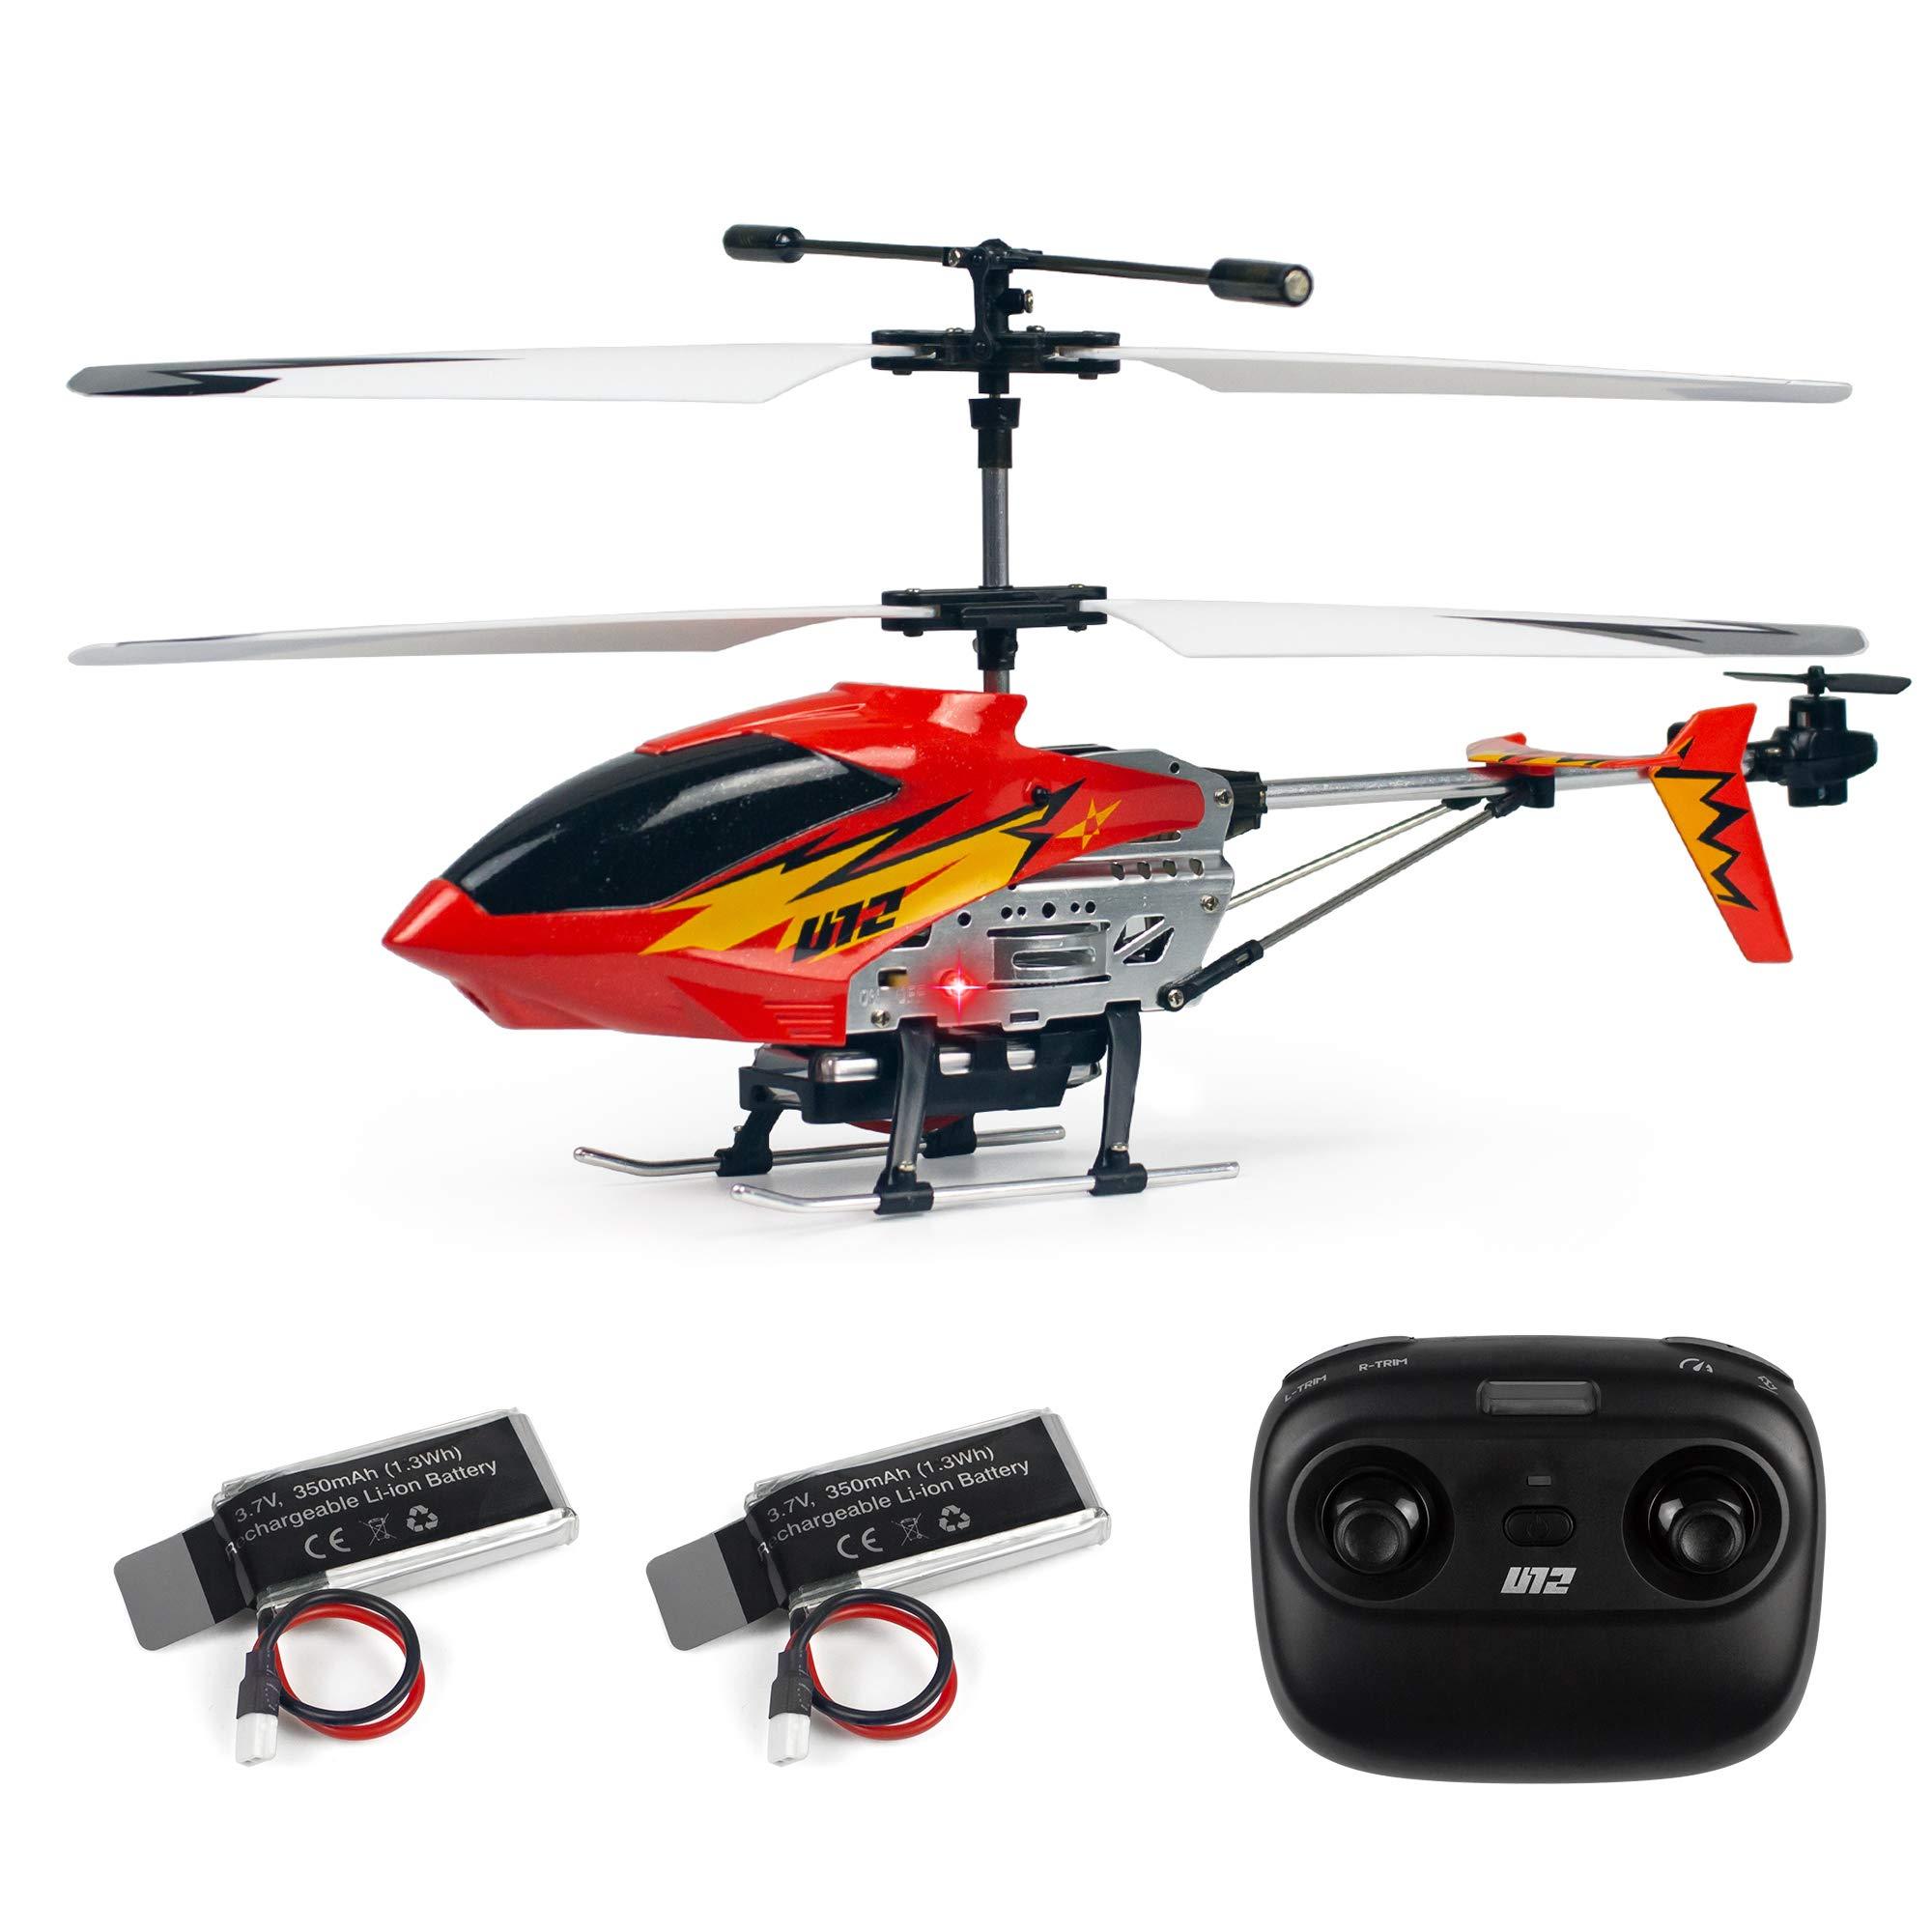 Small Indoor Helicopter: Small Indoor Helicopters: Types, Features, and Skill Levels